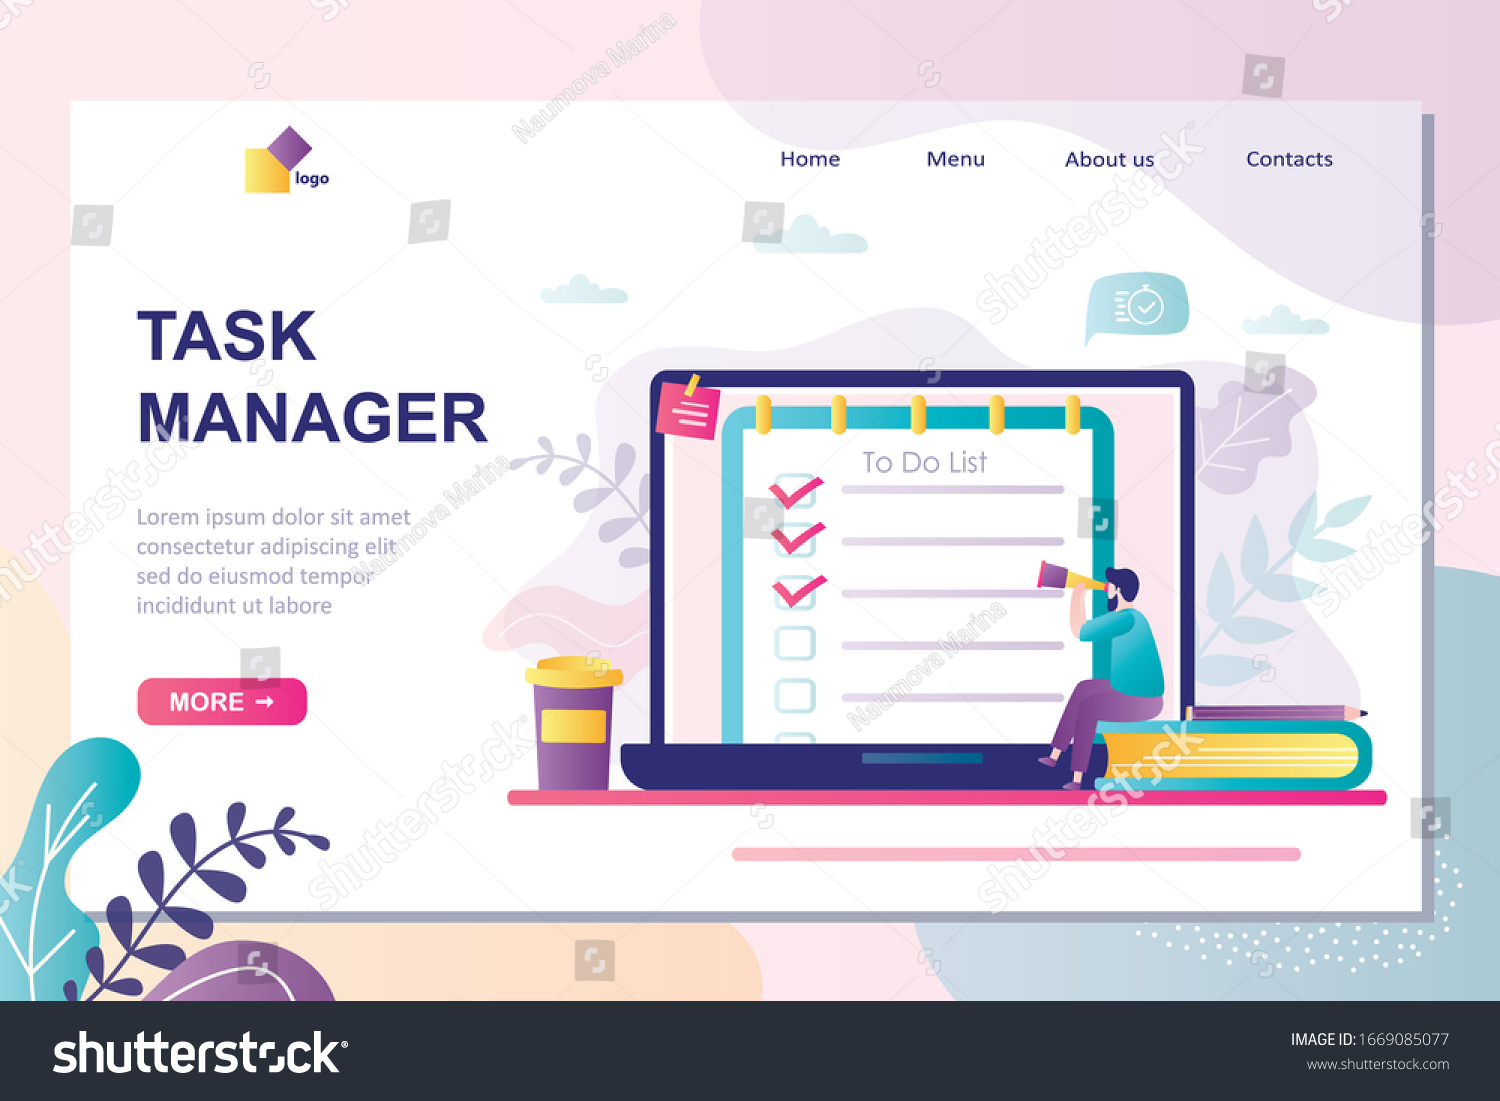 Task Manager Template from image.shutterstock.com